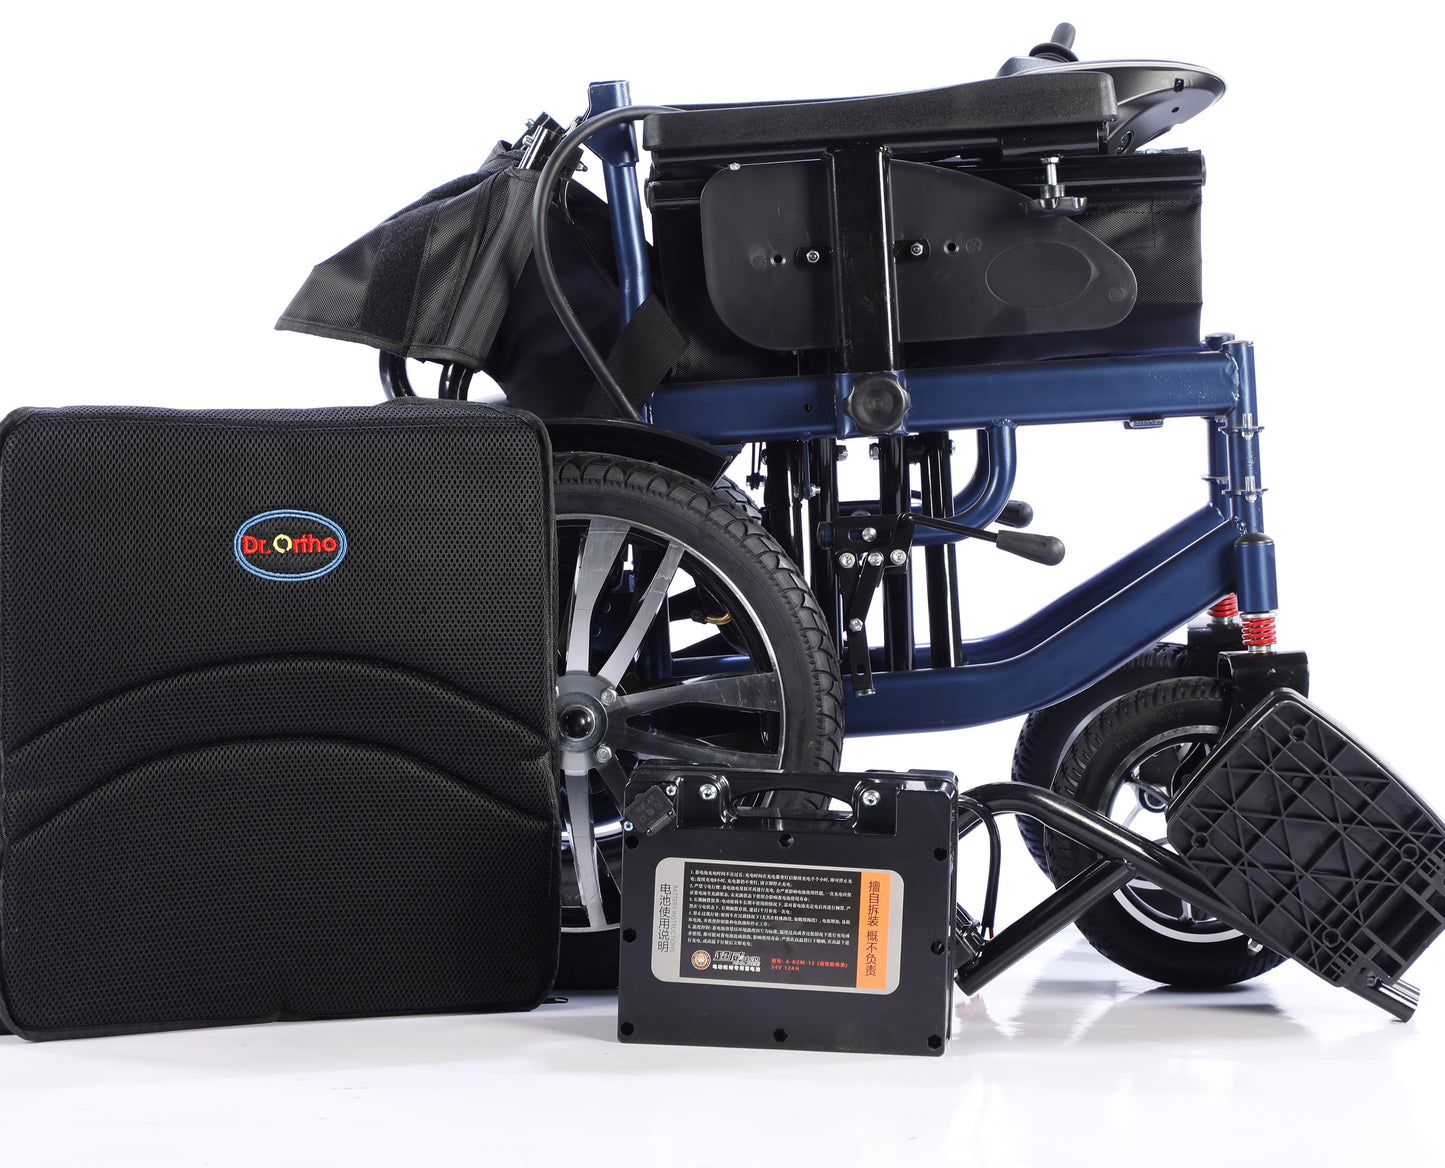 Dr.Ortho electric wheelchair DR-N-40-A for Heavy Duty , Comfortable Use Motor 2*250W